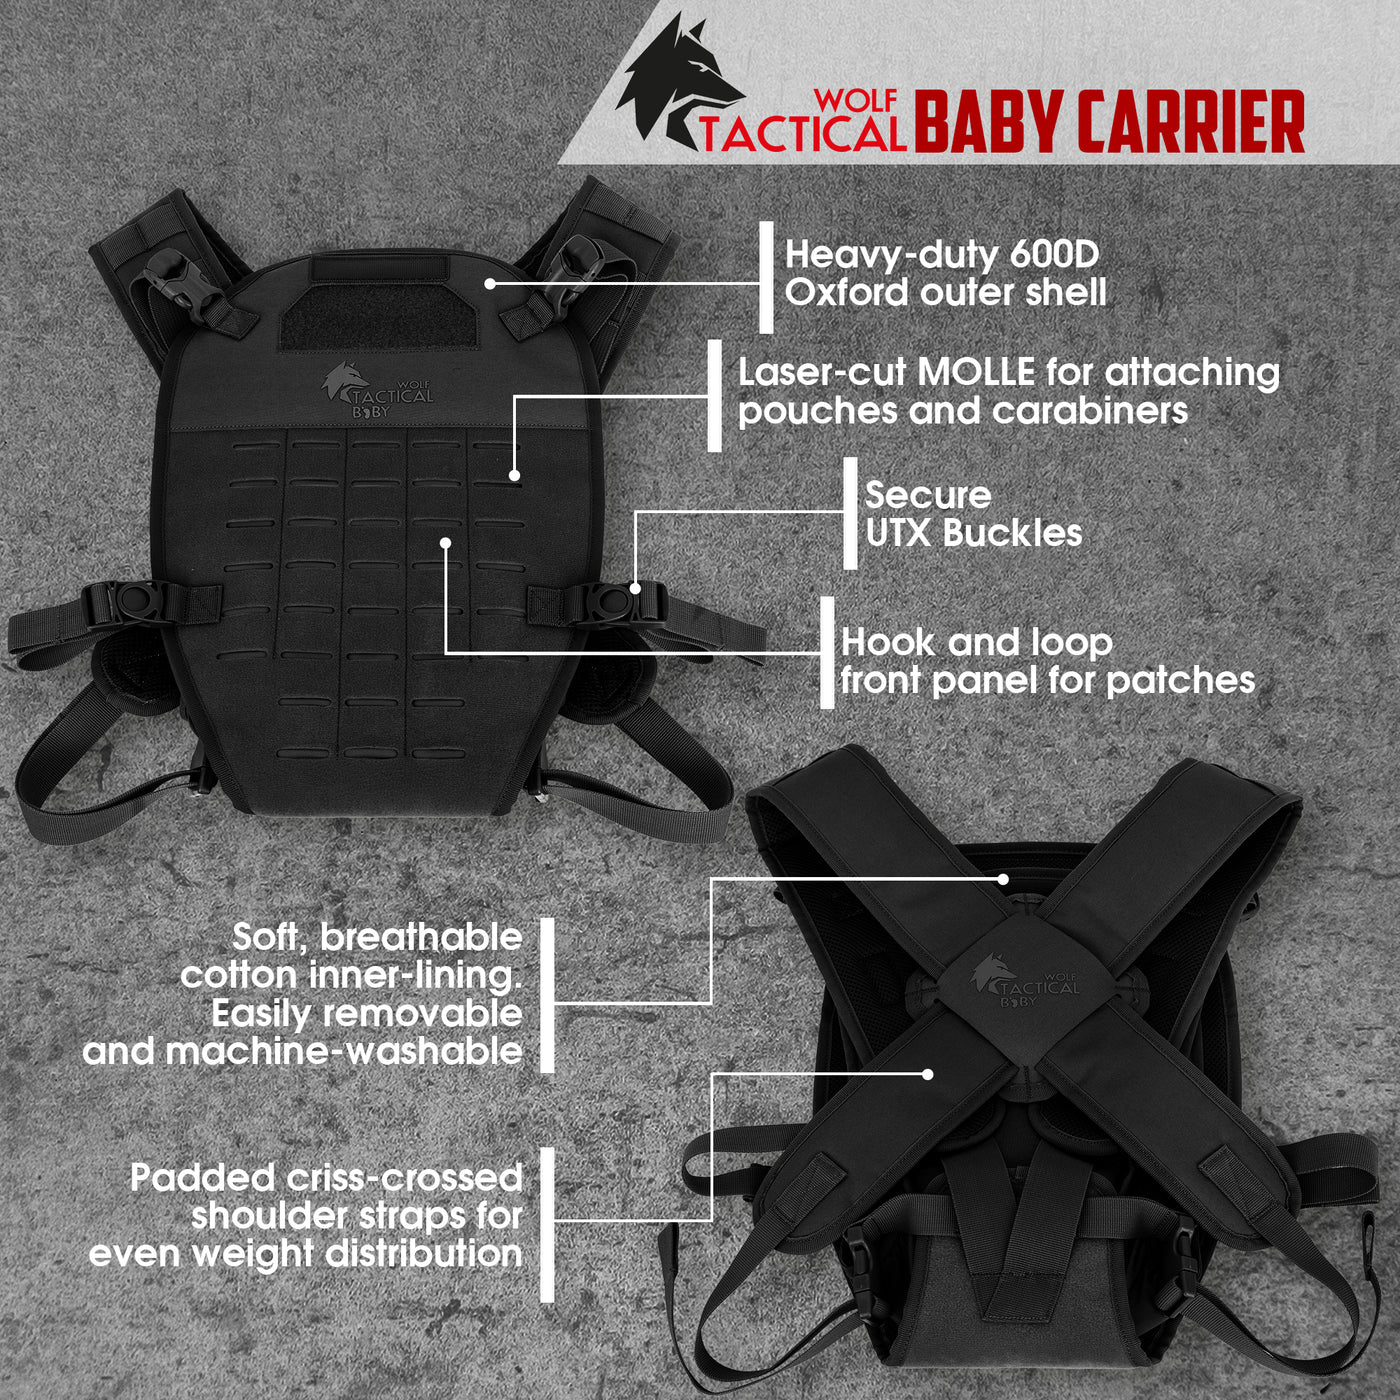 Toddler and Baby Carrier